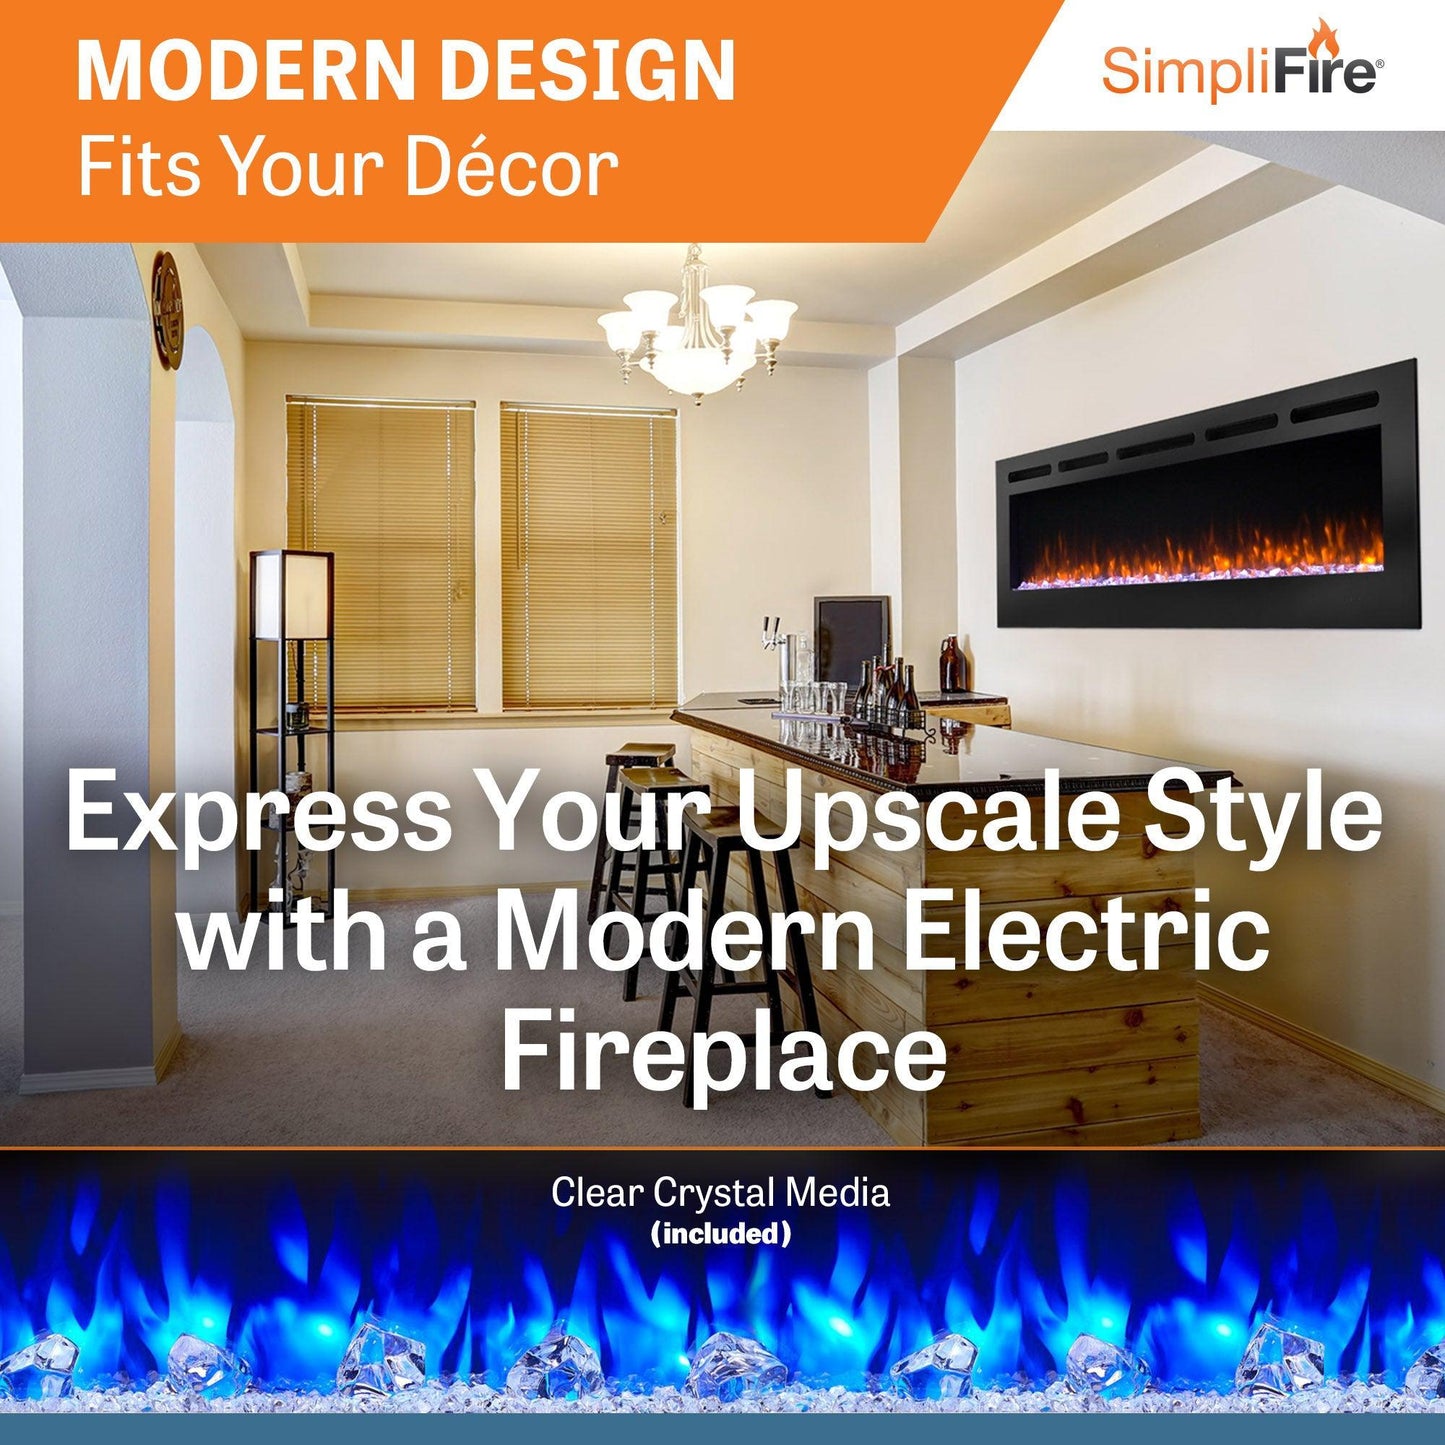 SimpliFire Allusion 84" Linear Electric Recessed Fireplace